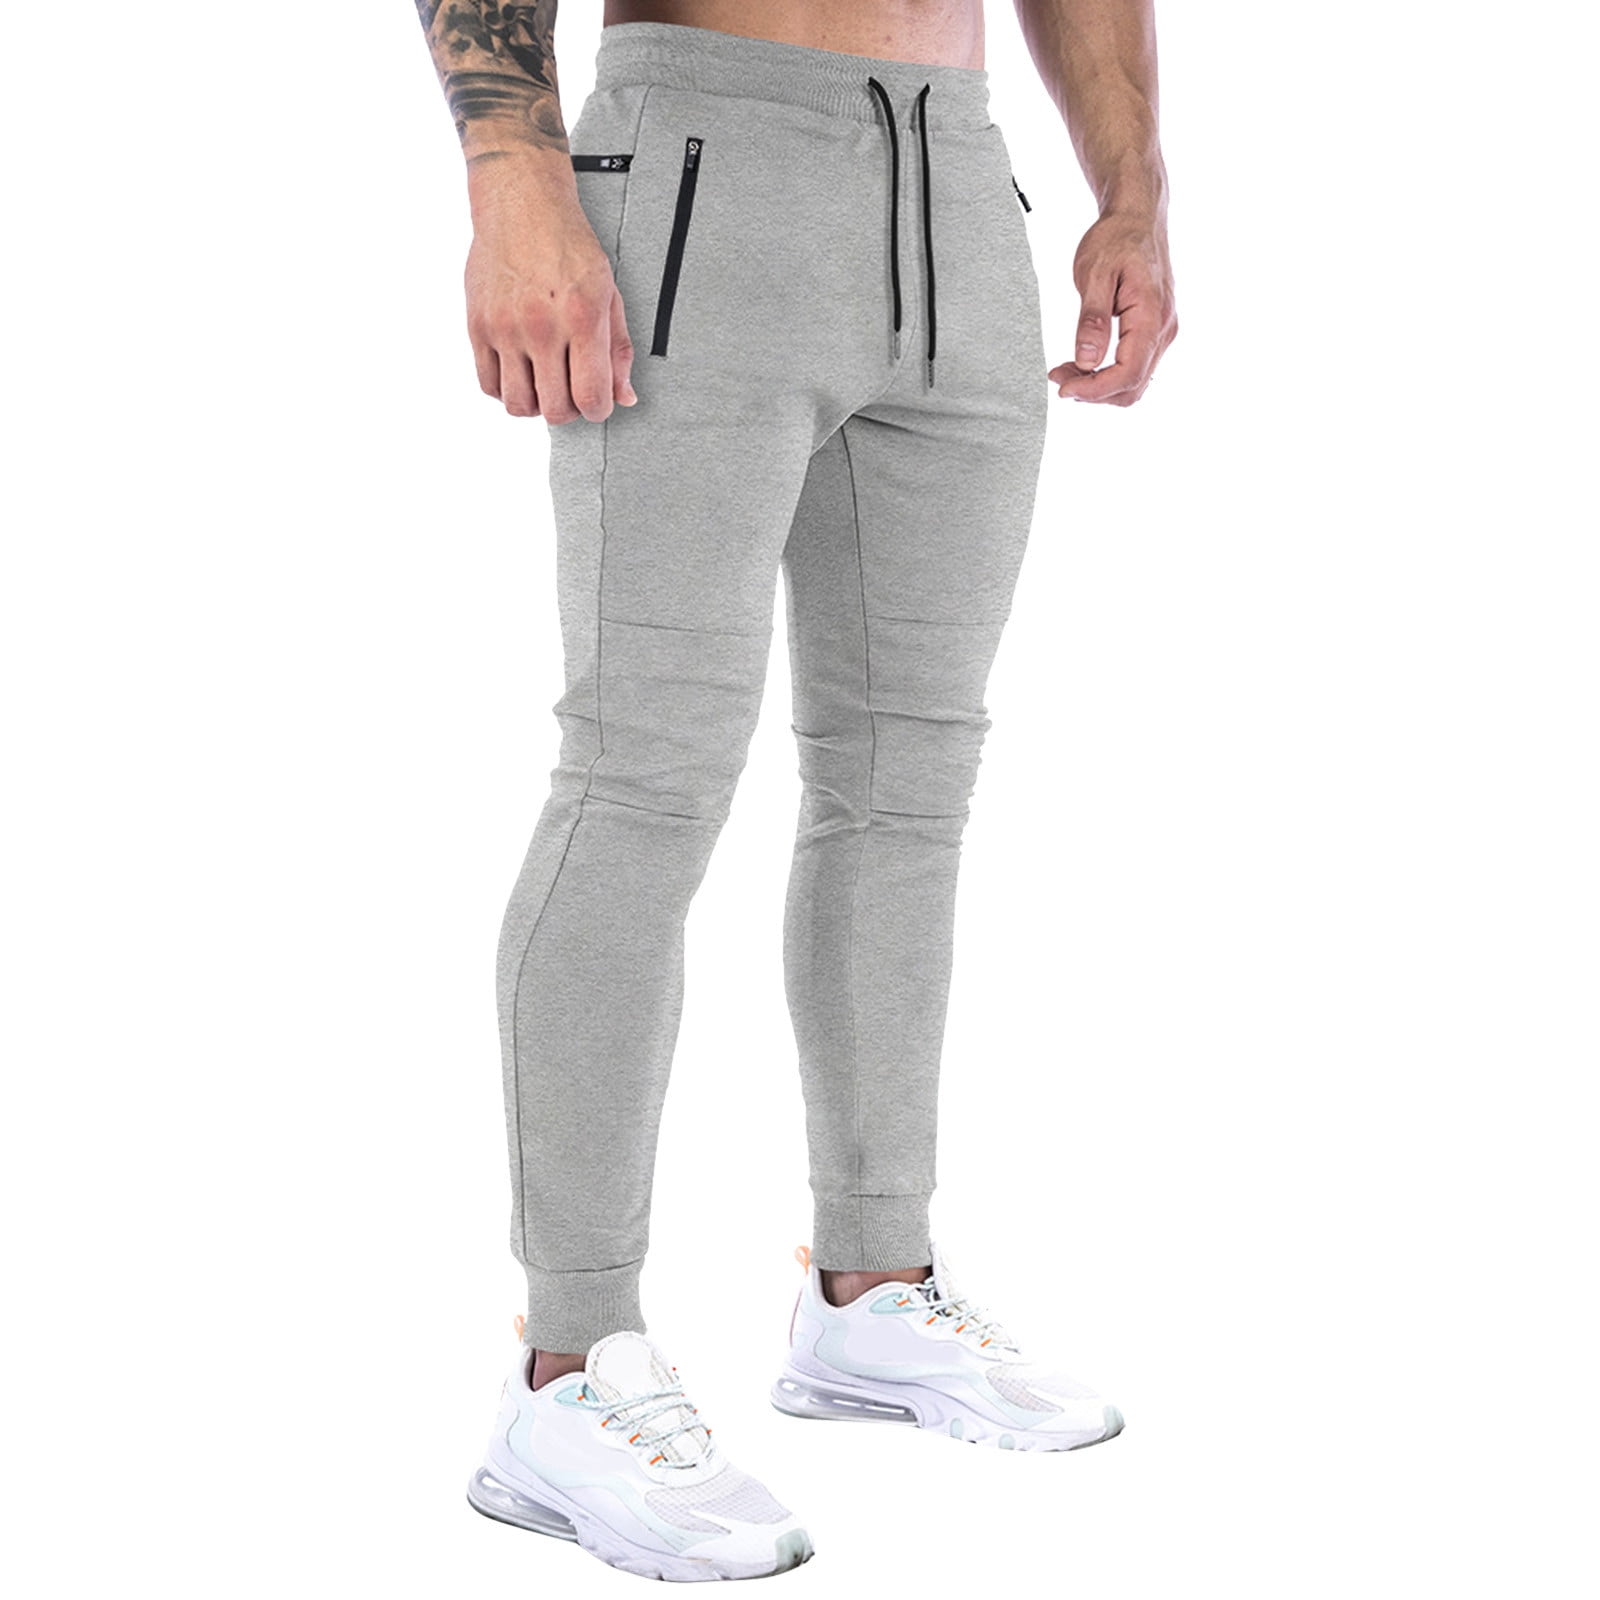 GWAABD Sweatpants for Men with Pockets Muscle Fitness Pants Mens Back ...